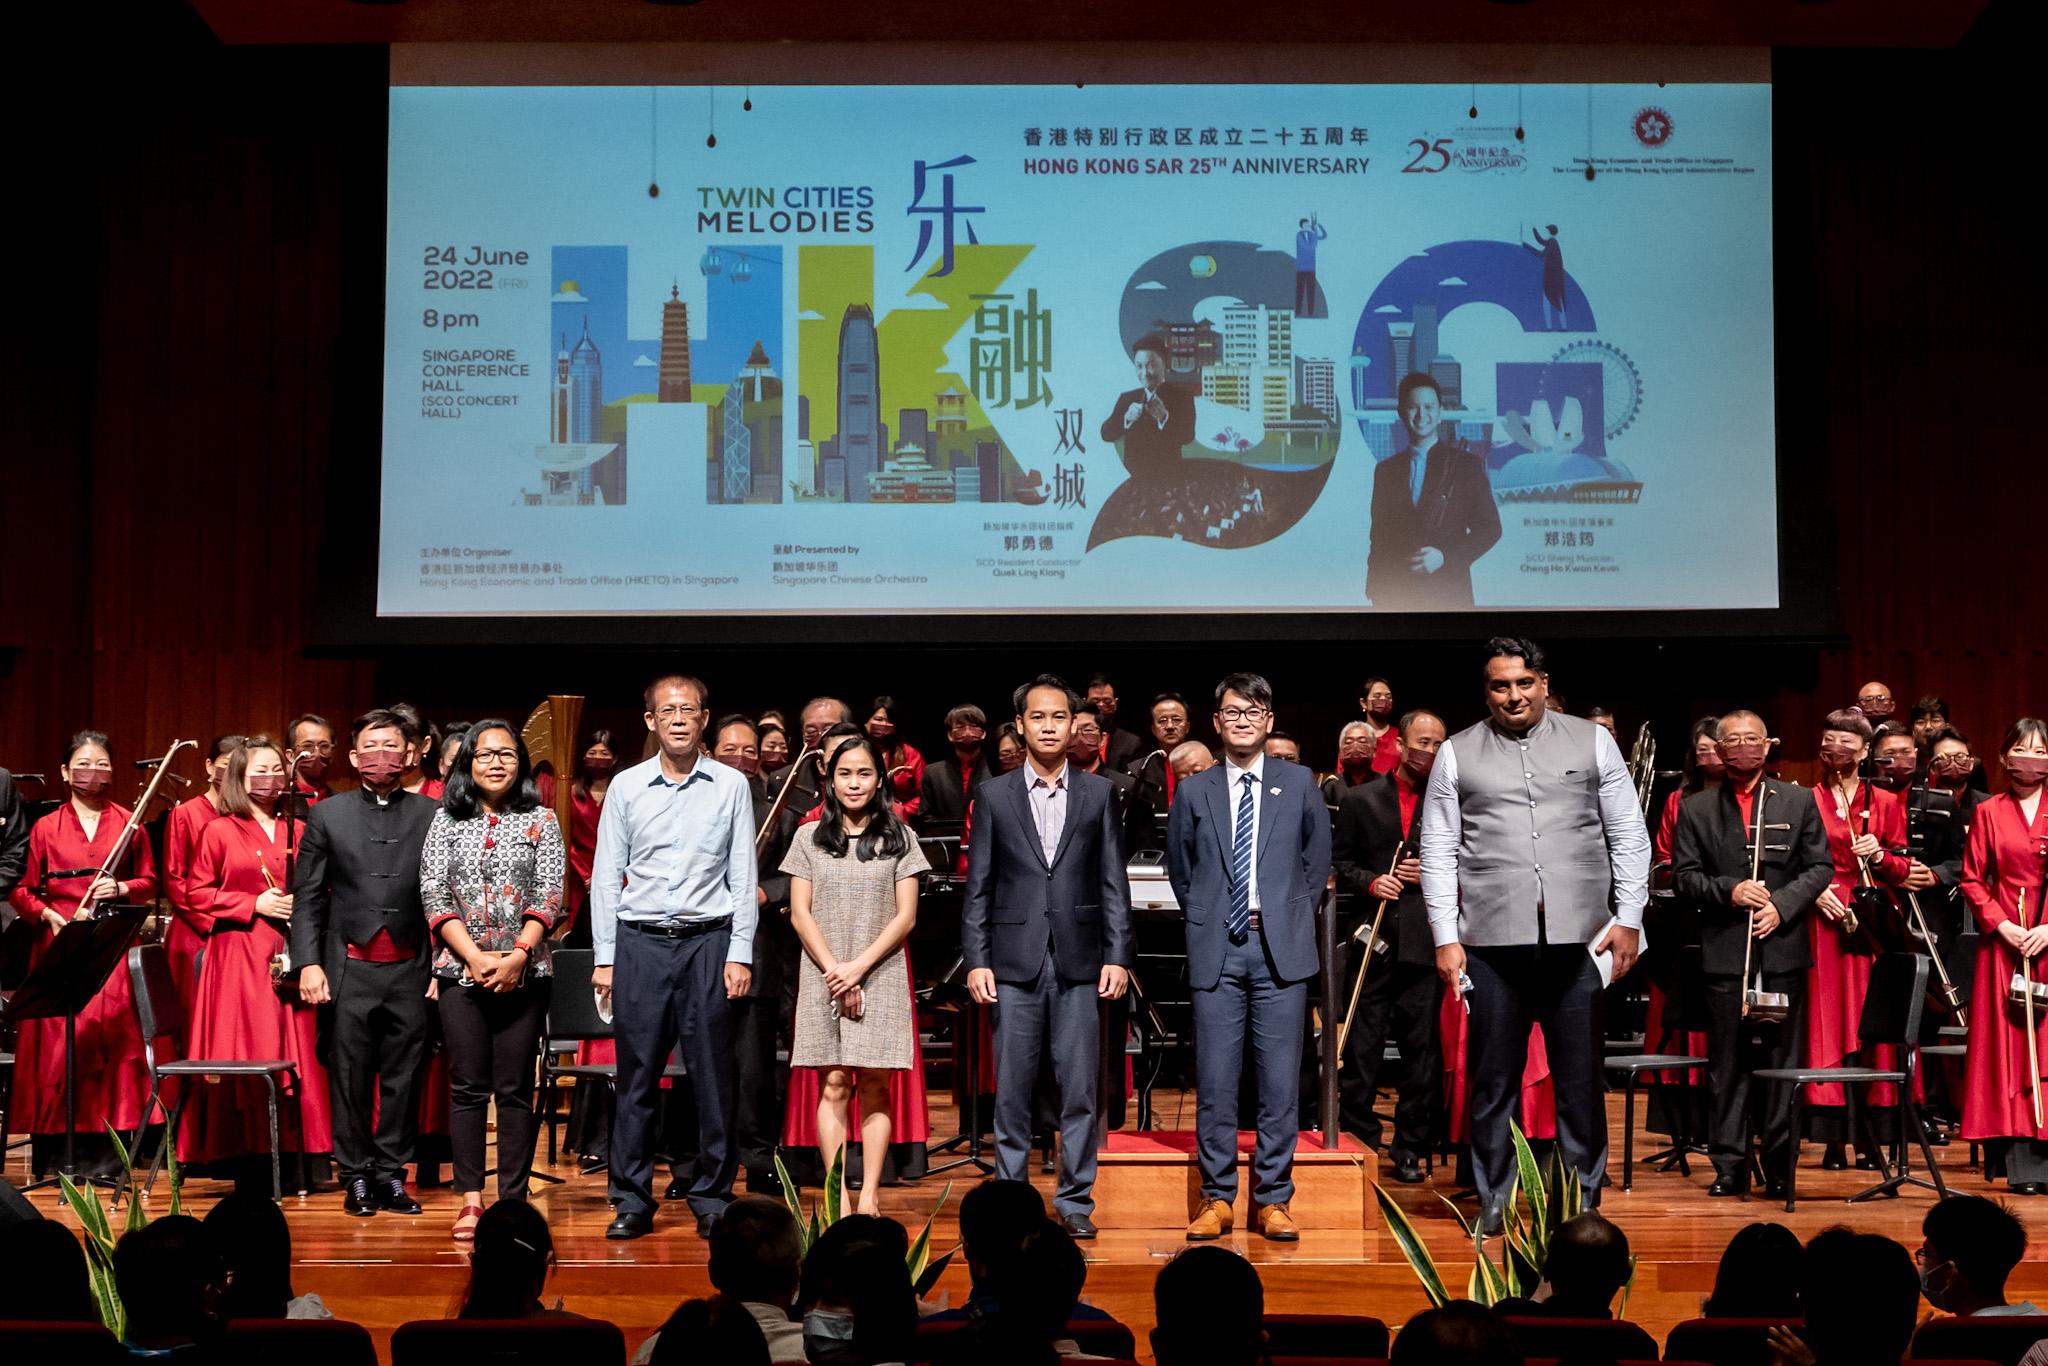 In celebration of the 25th anniversary of the establishment of the Hong Kong Special Administrative Region, the Hong Kong Economic and Trade Office in Singapore (Singapore ETO) presented the "Twin Cities Melodies" Chinese orchestra concert today (June 24). Photo shows the Director of the Singapore ETO, Mr Wong Chun To (second right), pictured with the Minister Counsellor of the Embassy of Indonesia in Singapore, Ms Hastin Dumadi (sixth right); the Counsellor of the High Commission of India in Singapore, Mr Nitinjeet Singh (first right); Second Secretaries of the Embassy of the Lao People's Democratic Republic in Singapore Mr Nikone Keopanya (third right) and Ms Malaychanh Phetxomphou (fourth right); and Deputy Director of China Cultural Centre in Singapore, Mr Zhou Zheng (fifth right). 